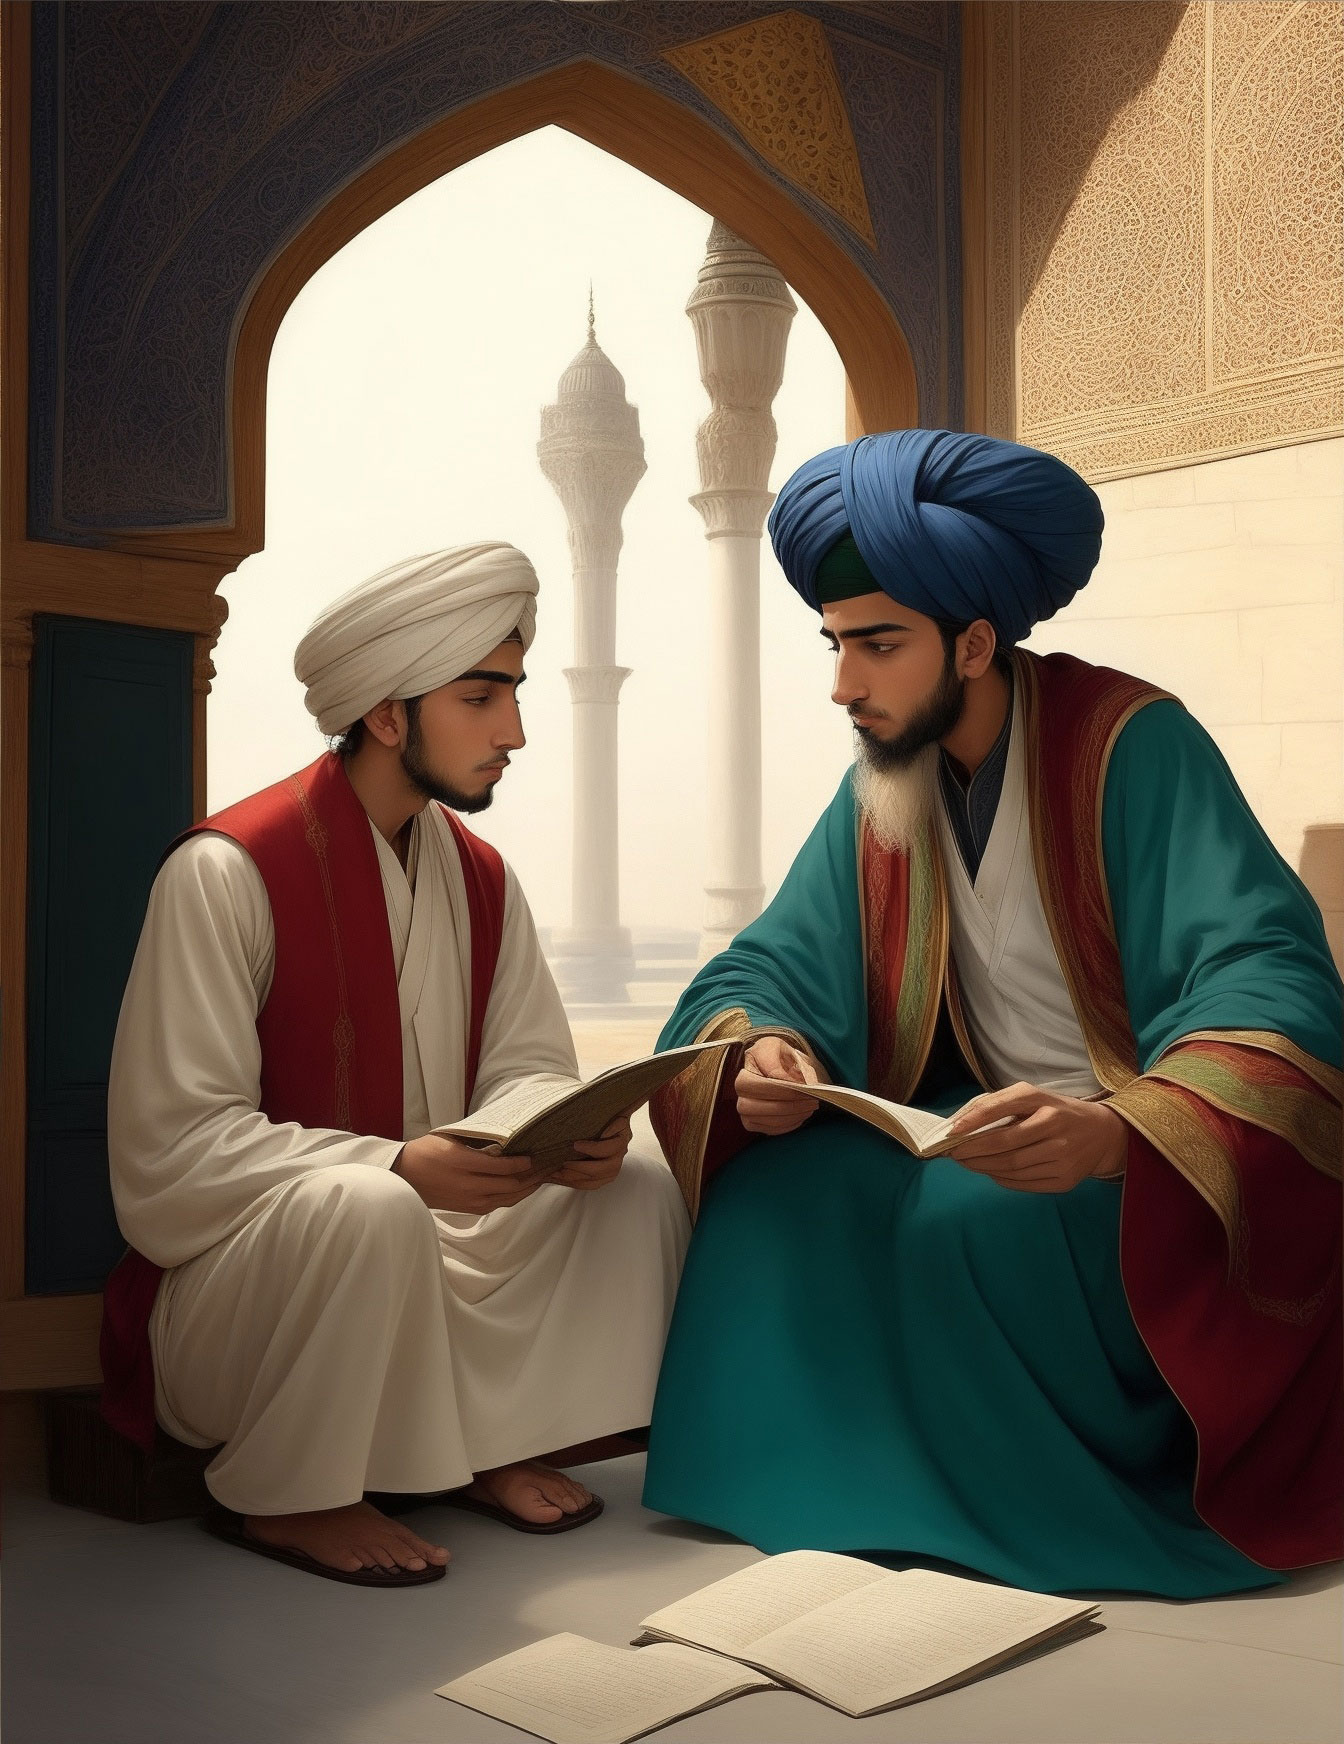 The Story of the Young Man and the Sufi Sage